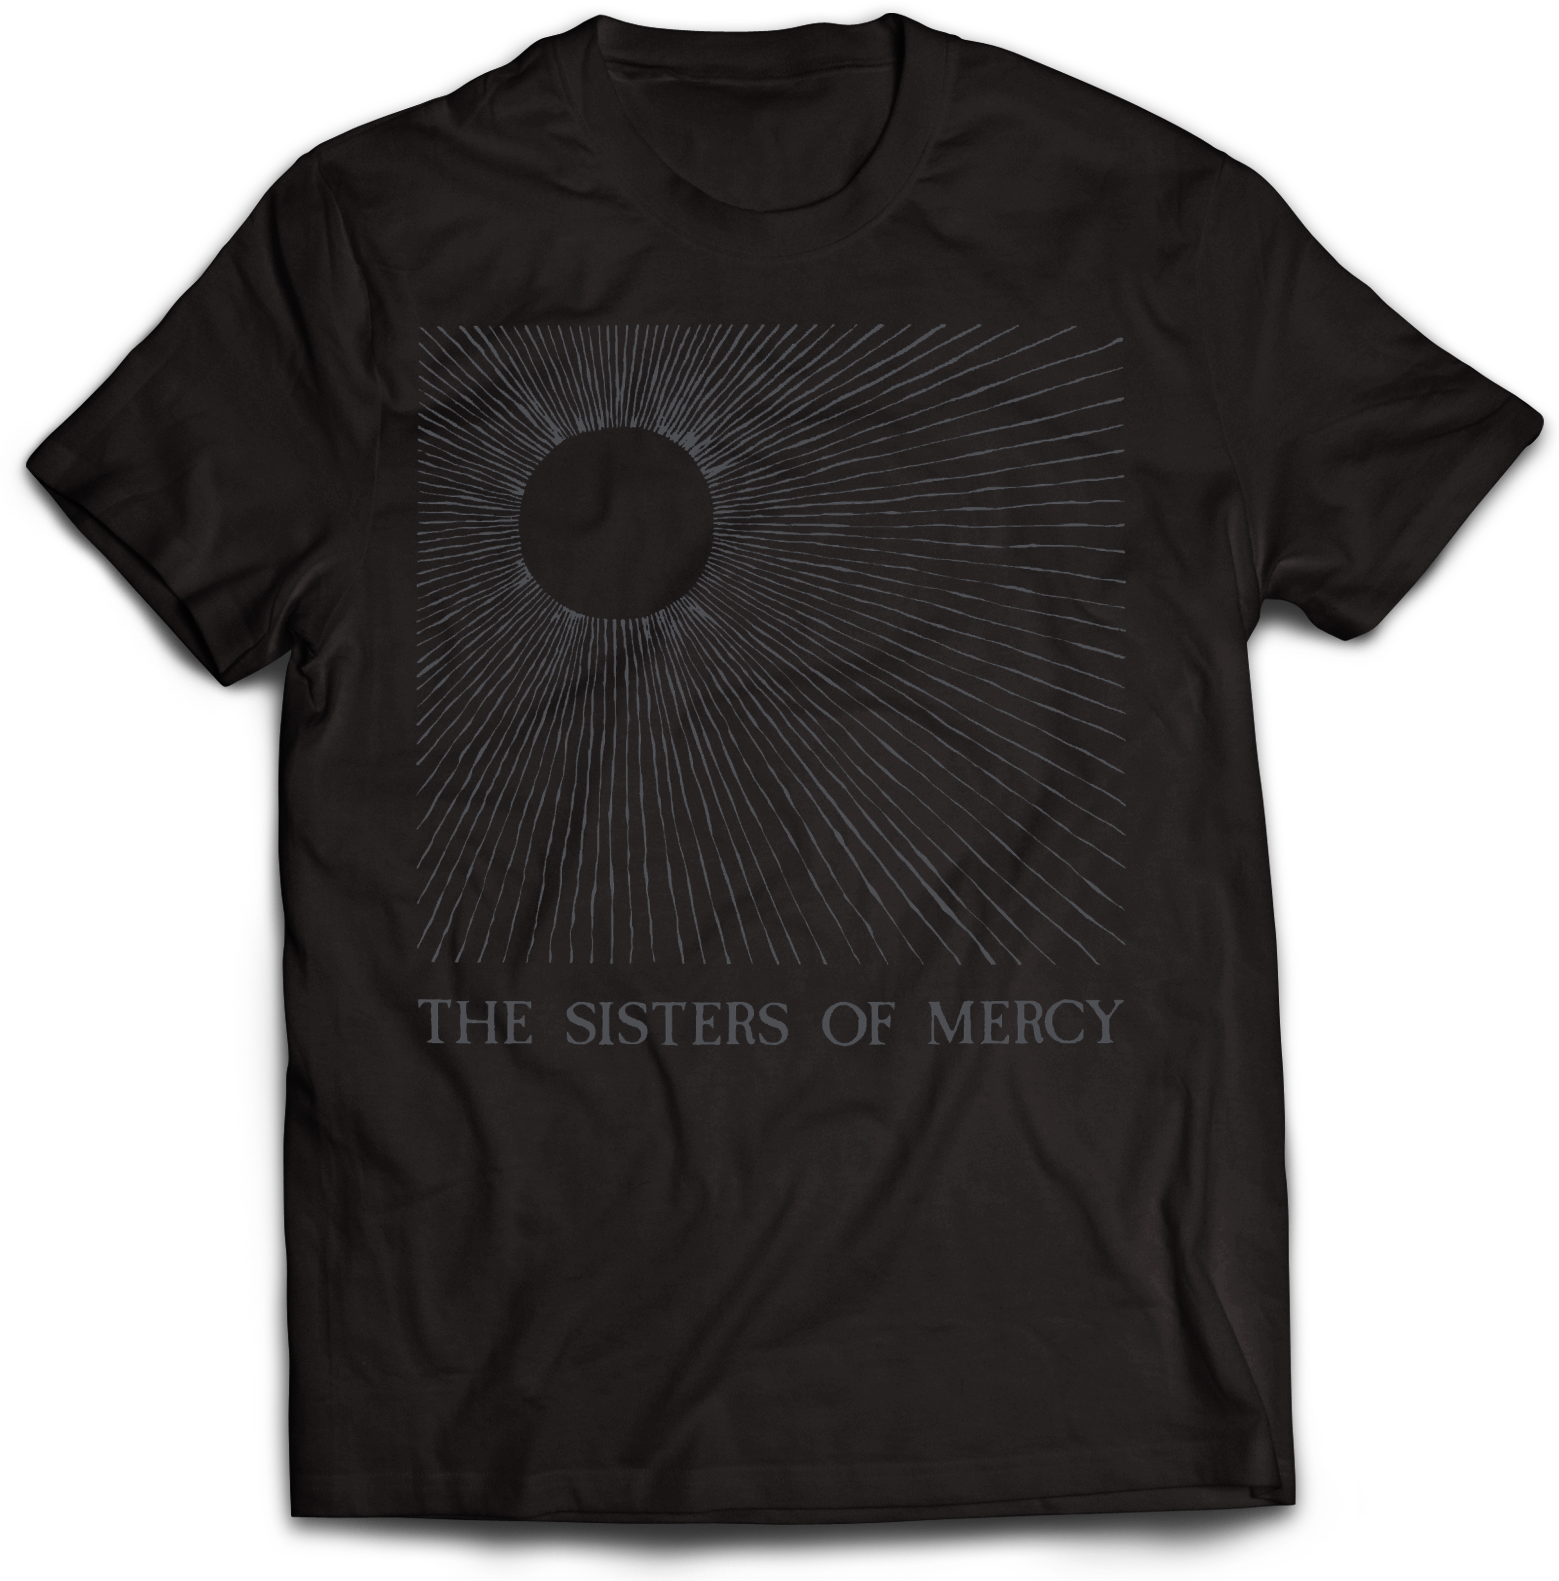 THE SISTERS OF MERCY: "TEMPLE" T-SHIRT